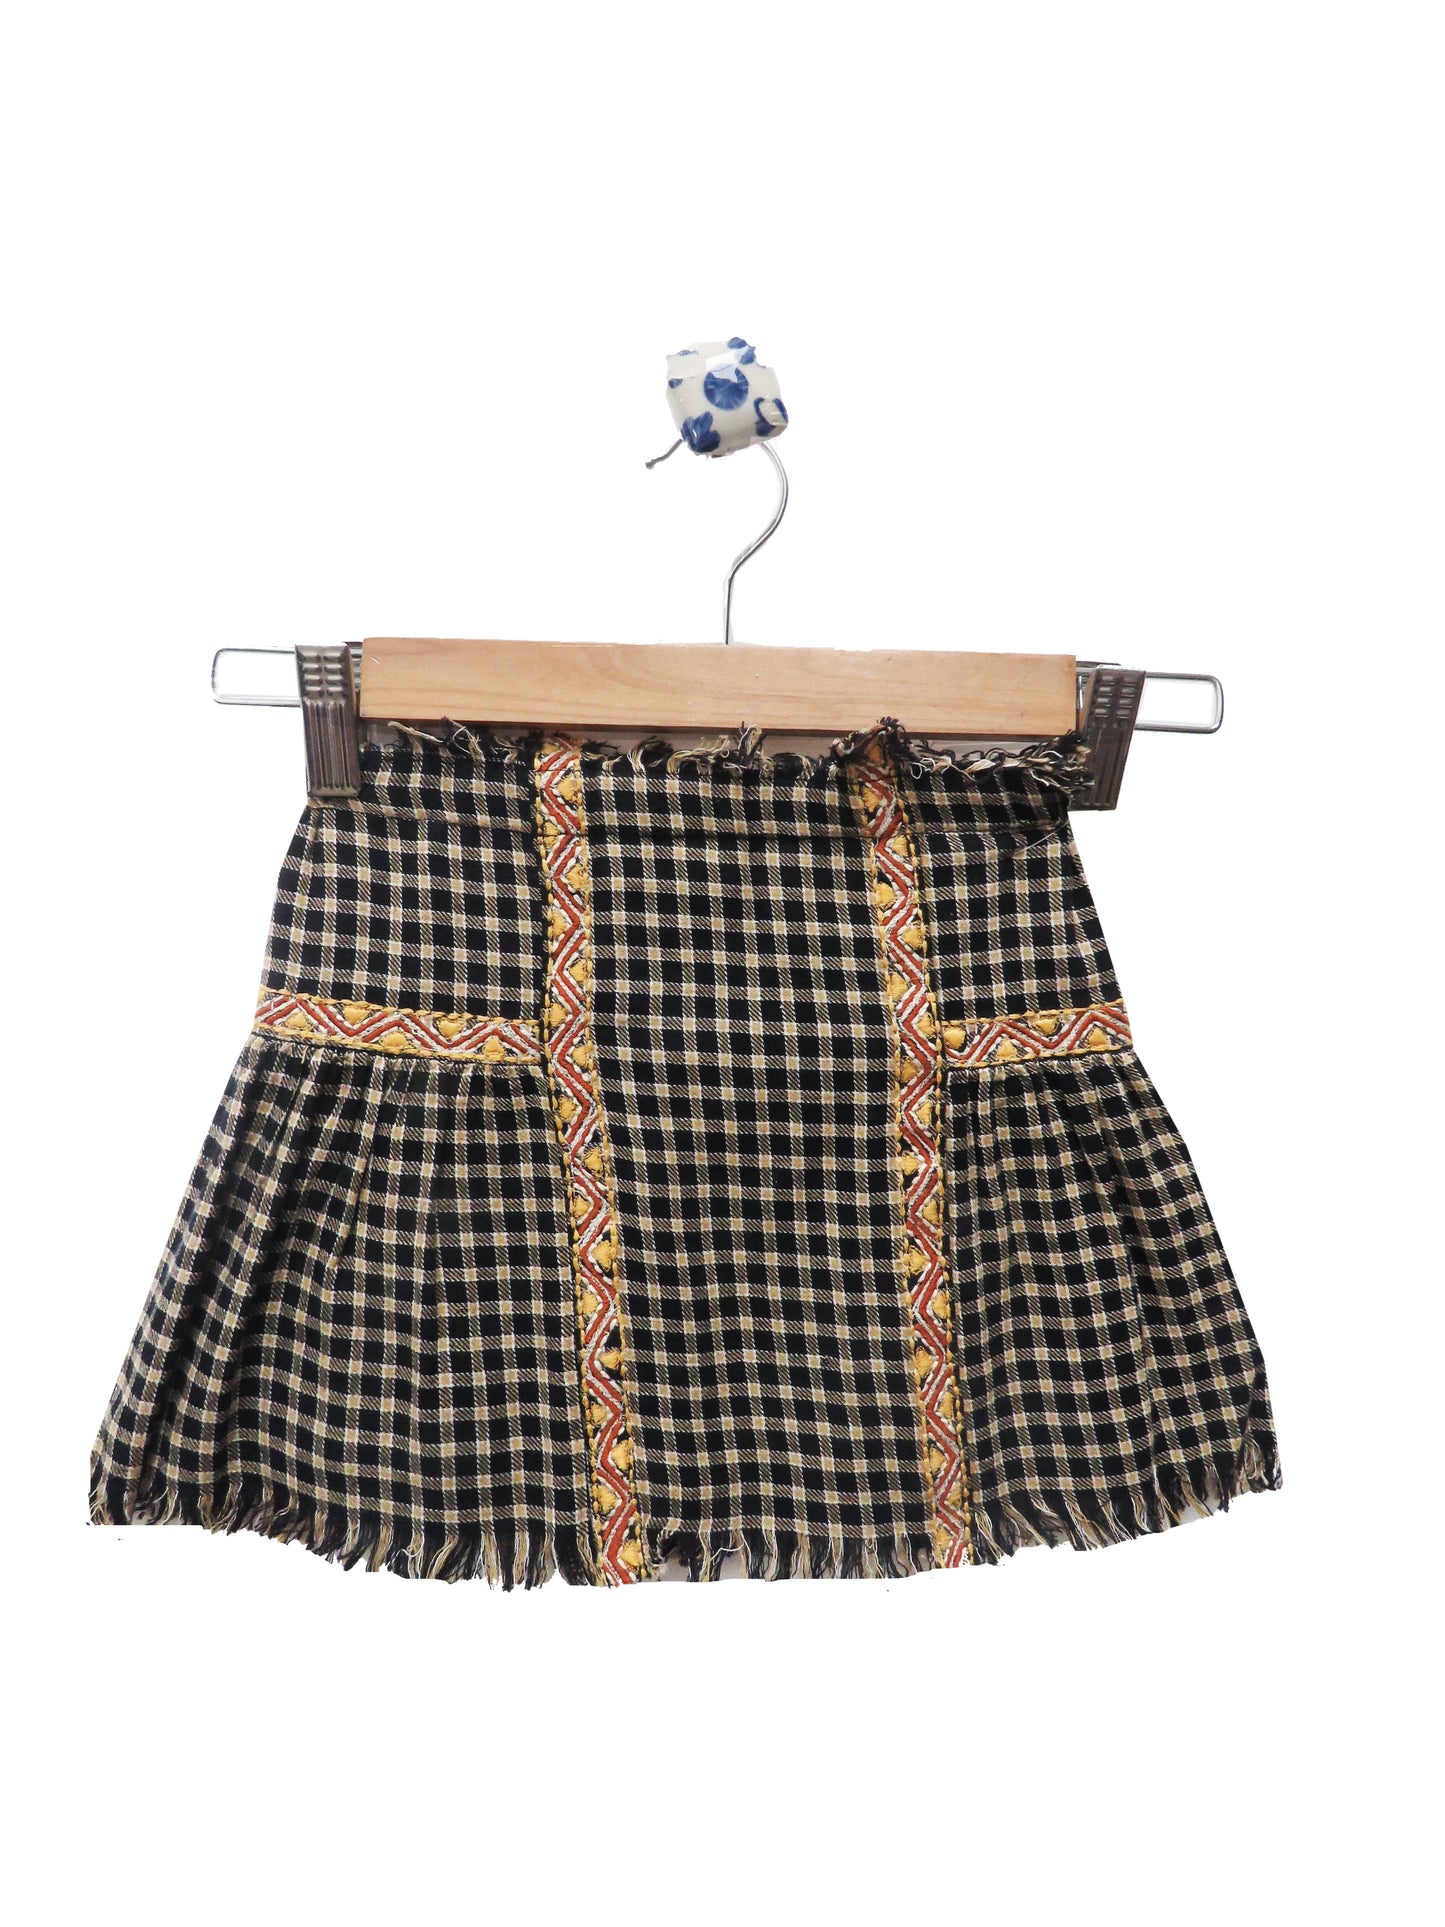 BLACK CHECKERED SKIRTS WITH EMBROIDERY AND FRINGES